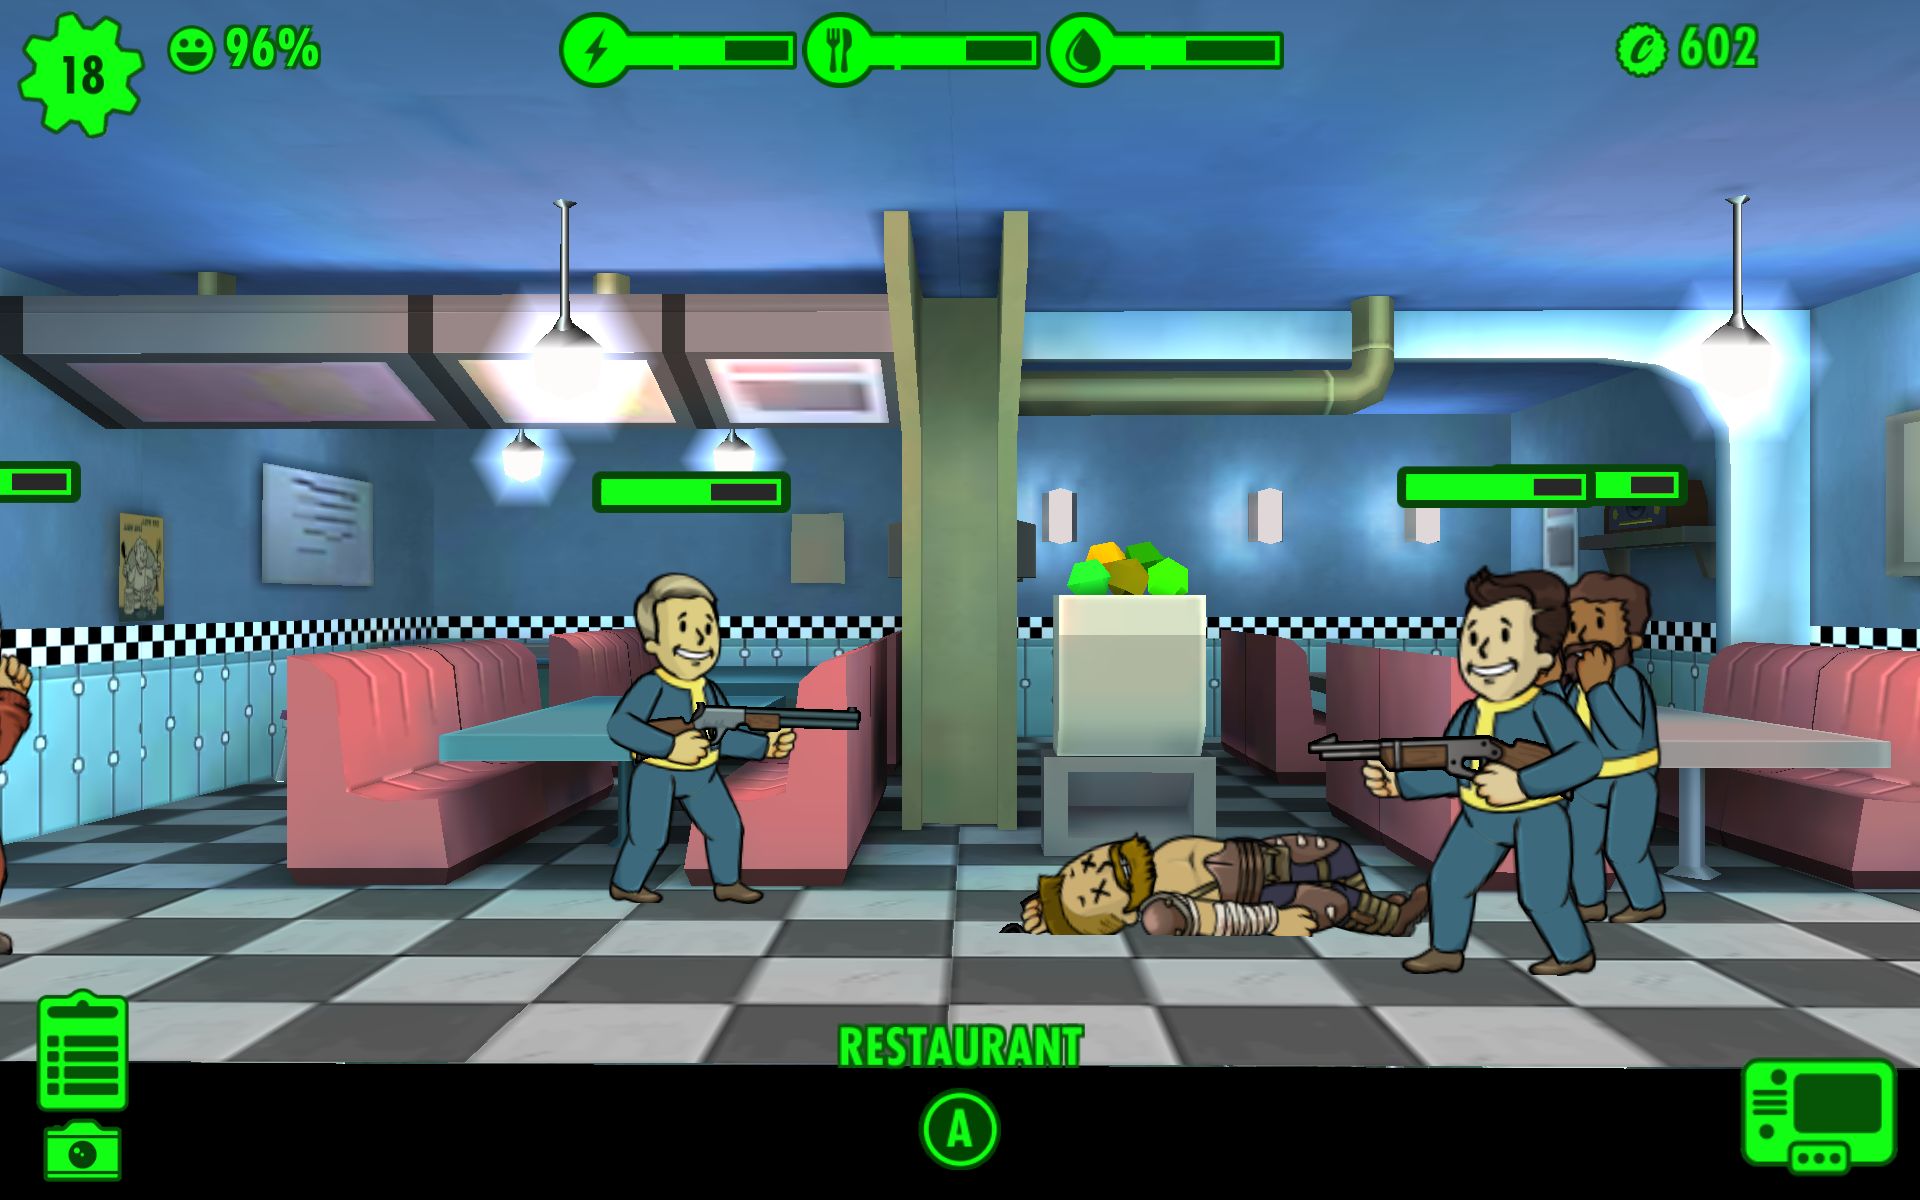 fallout shelter legendary weapons trophy